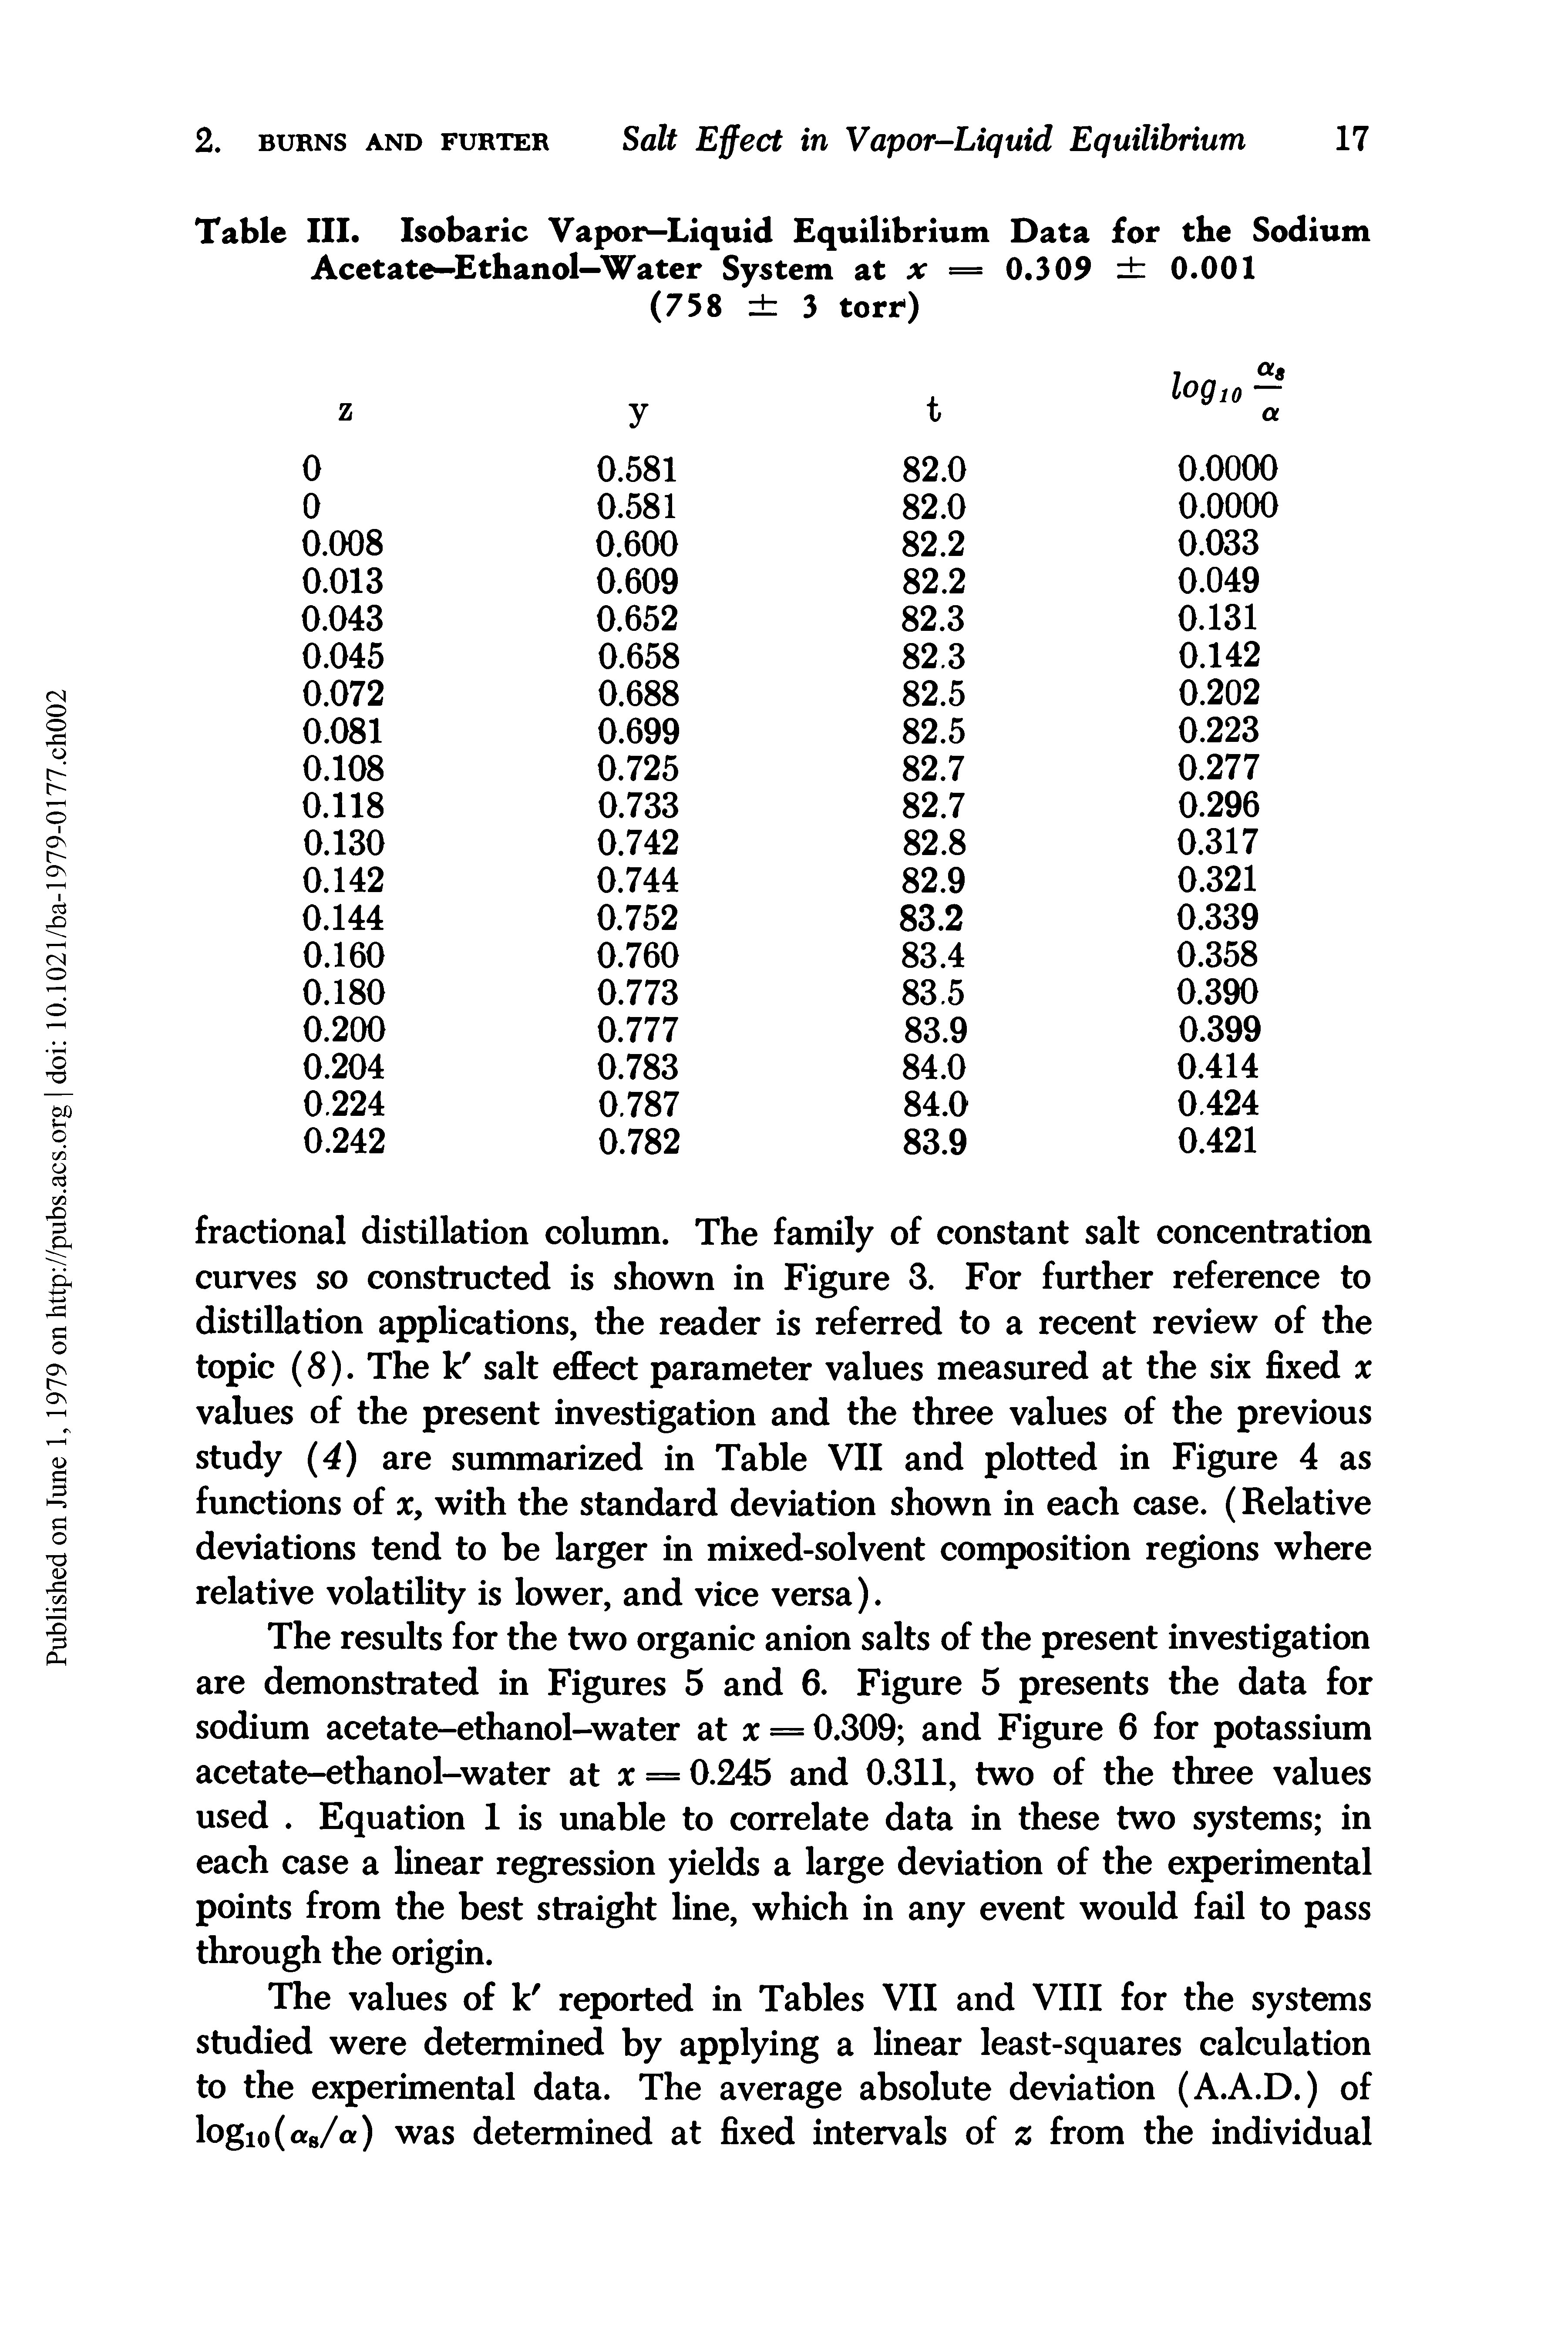 Table III. Isobaric Vapory-Liquid Equilibrium Data for the Sodium Acetate—Ethanol—Water System at x = 0.309 0.001 (758 3 torr)...